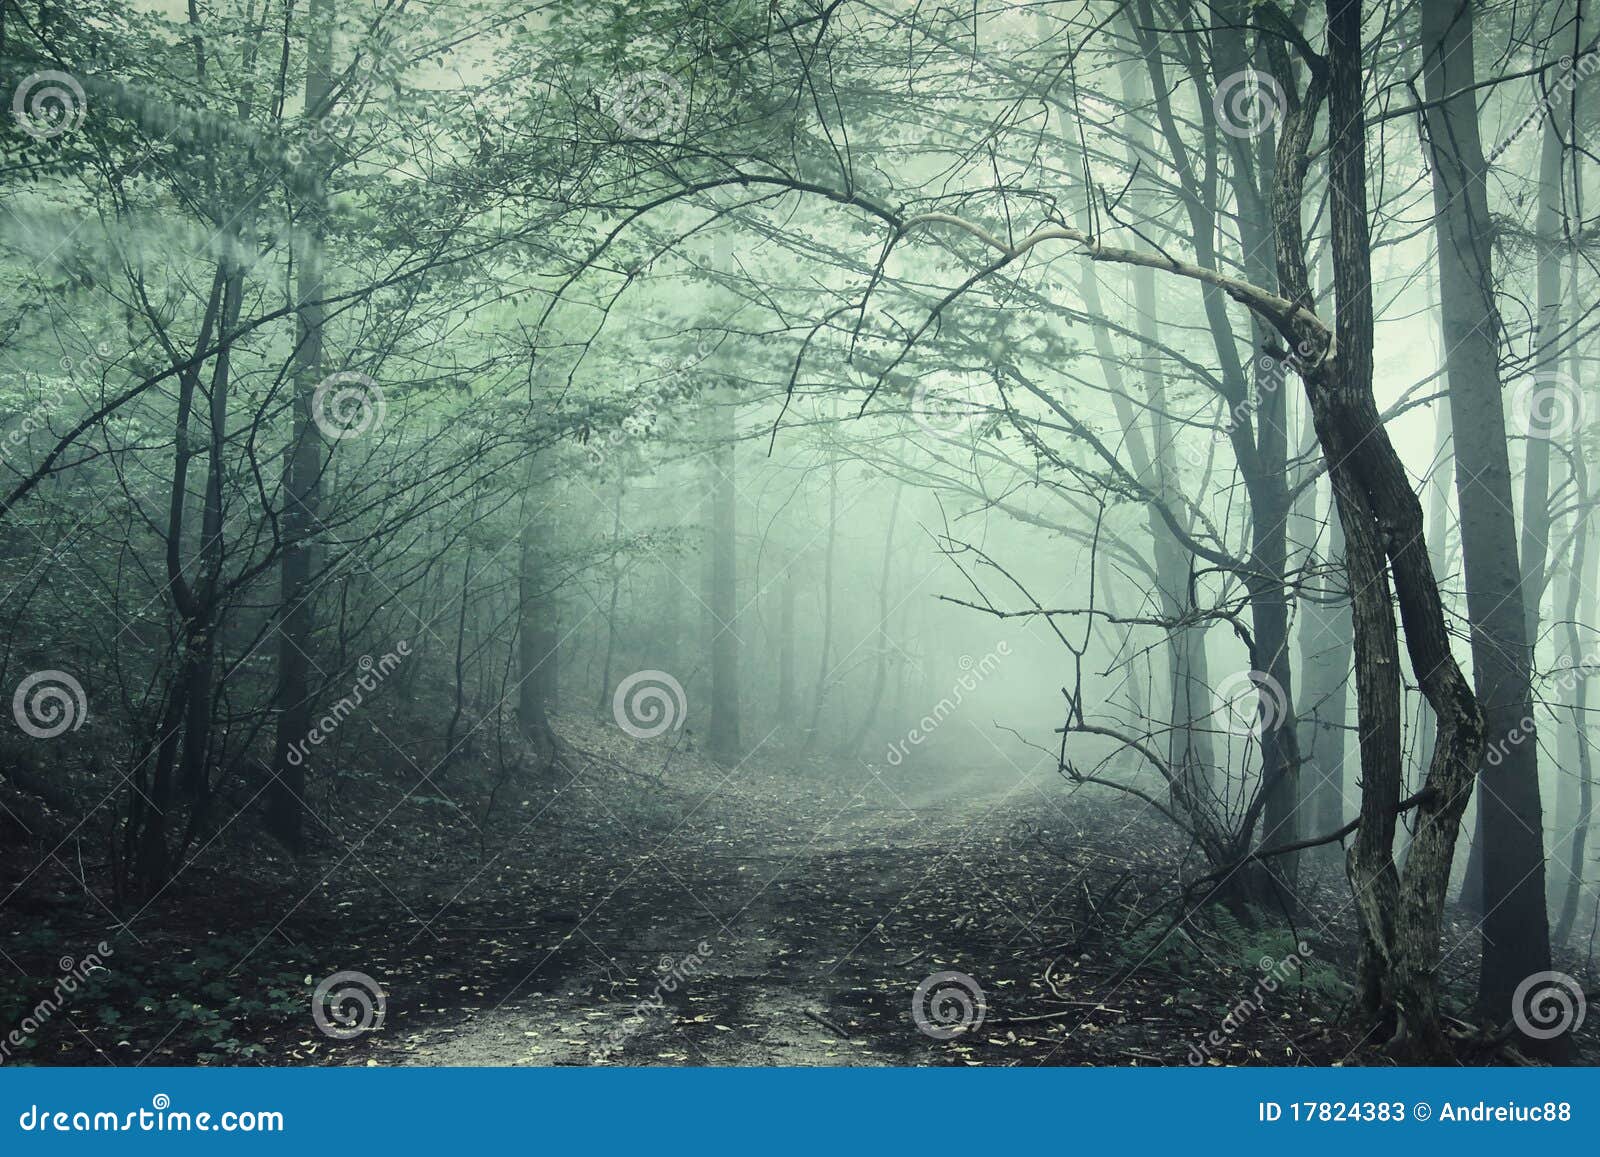 twisted circular tree branches in a foggy forest w